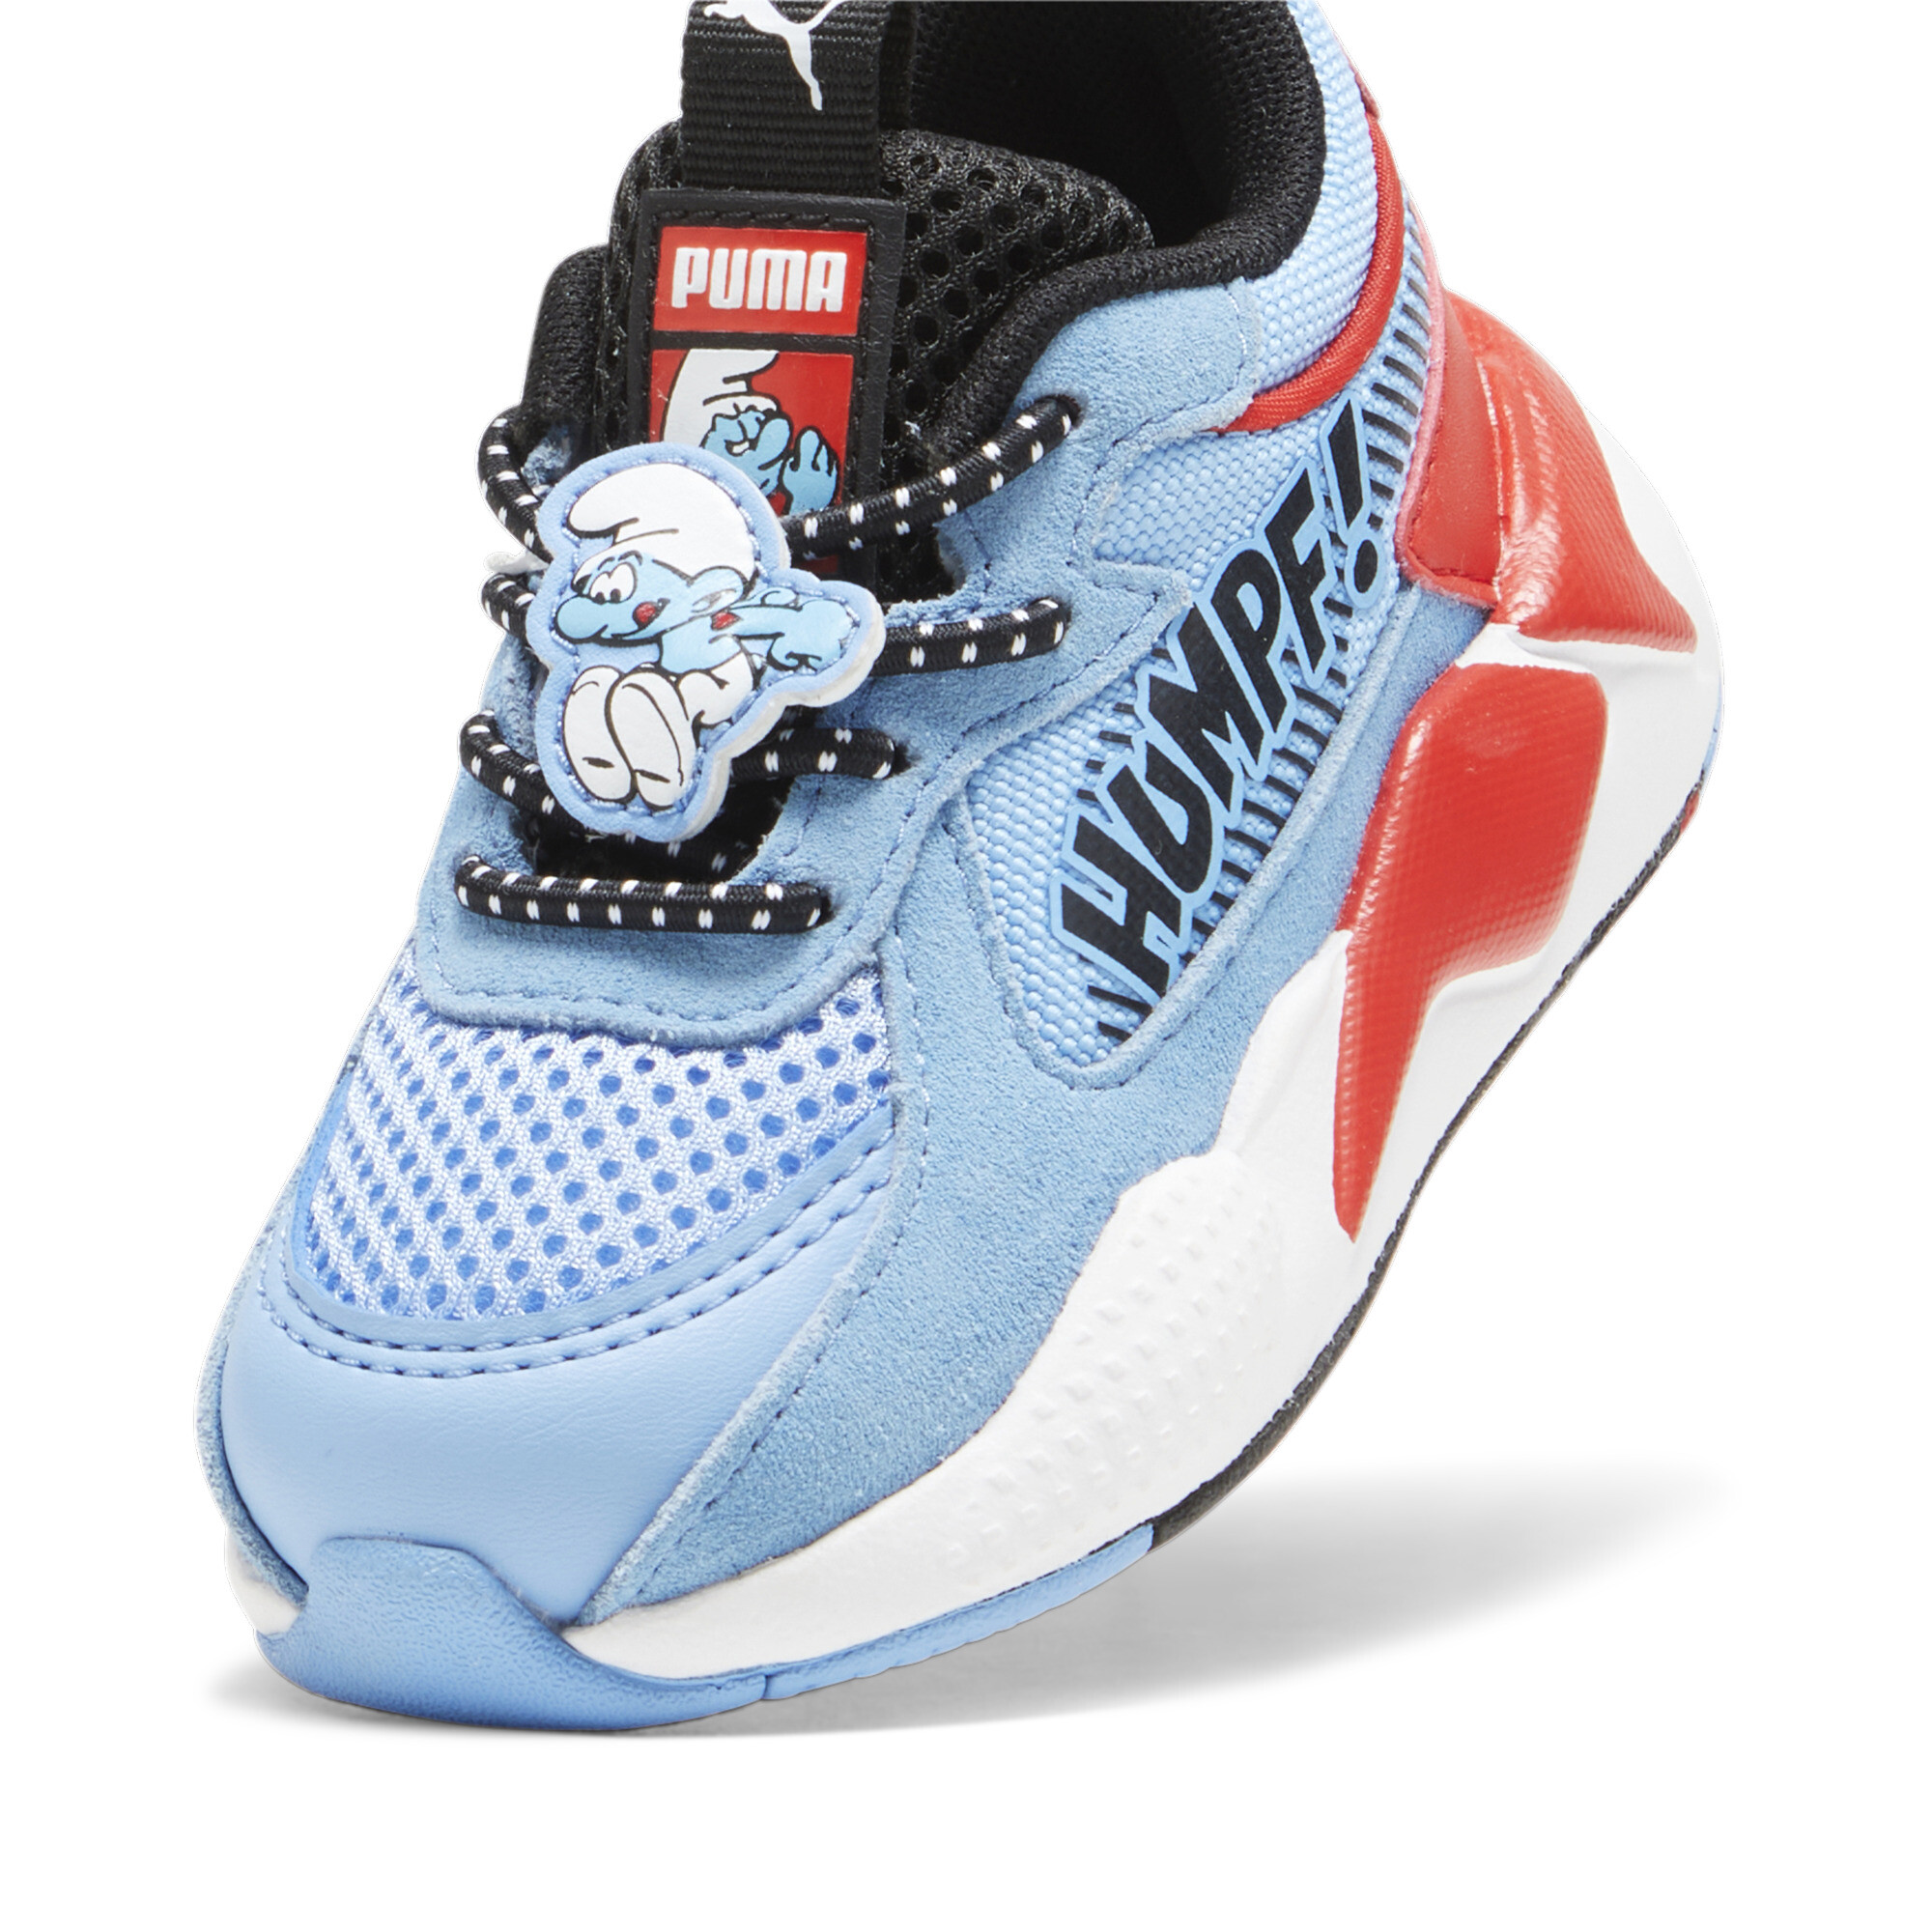 Kids' PUMA X THE SMURFS RS-X Toddlers' Sneakers In Blue, Size EU 20